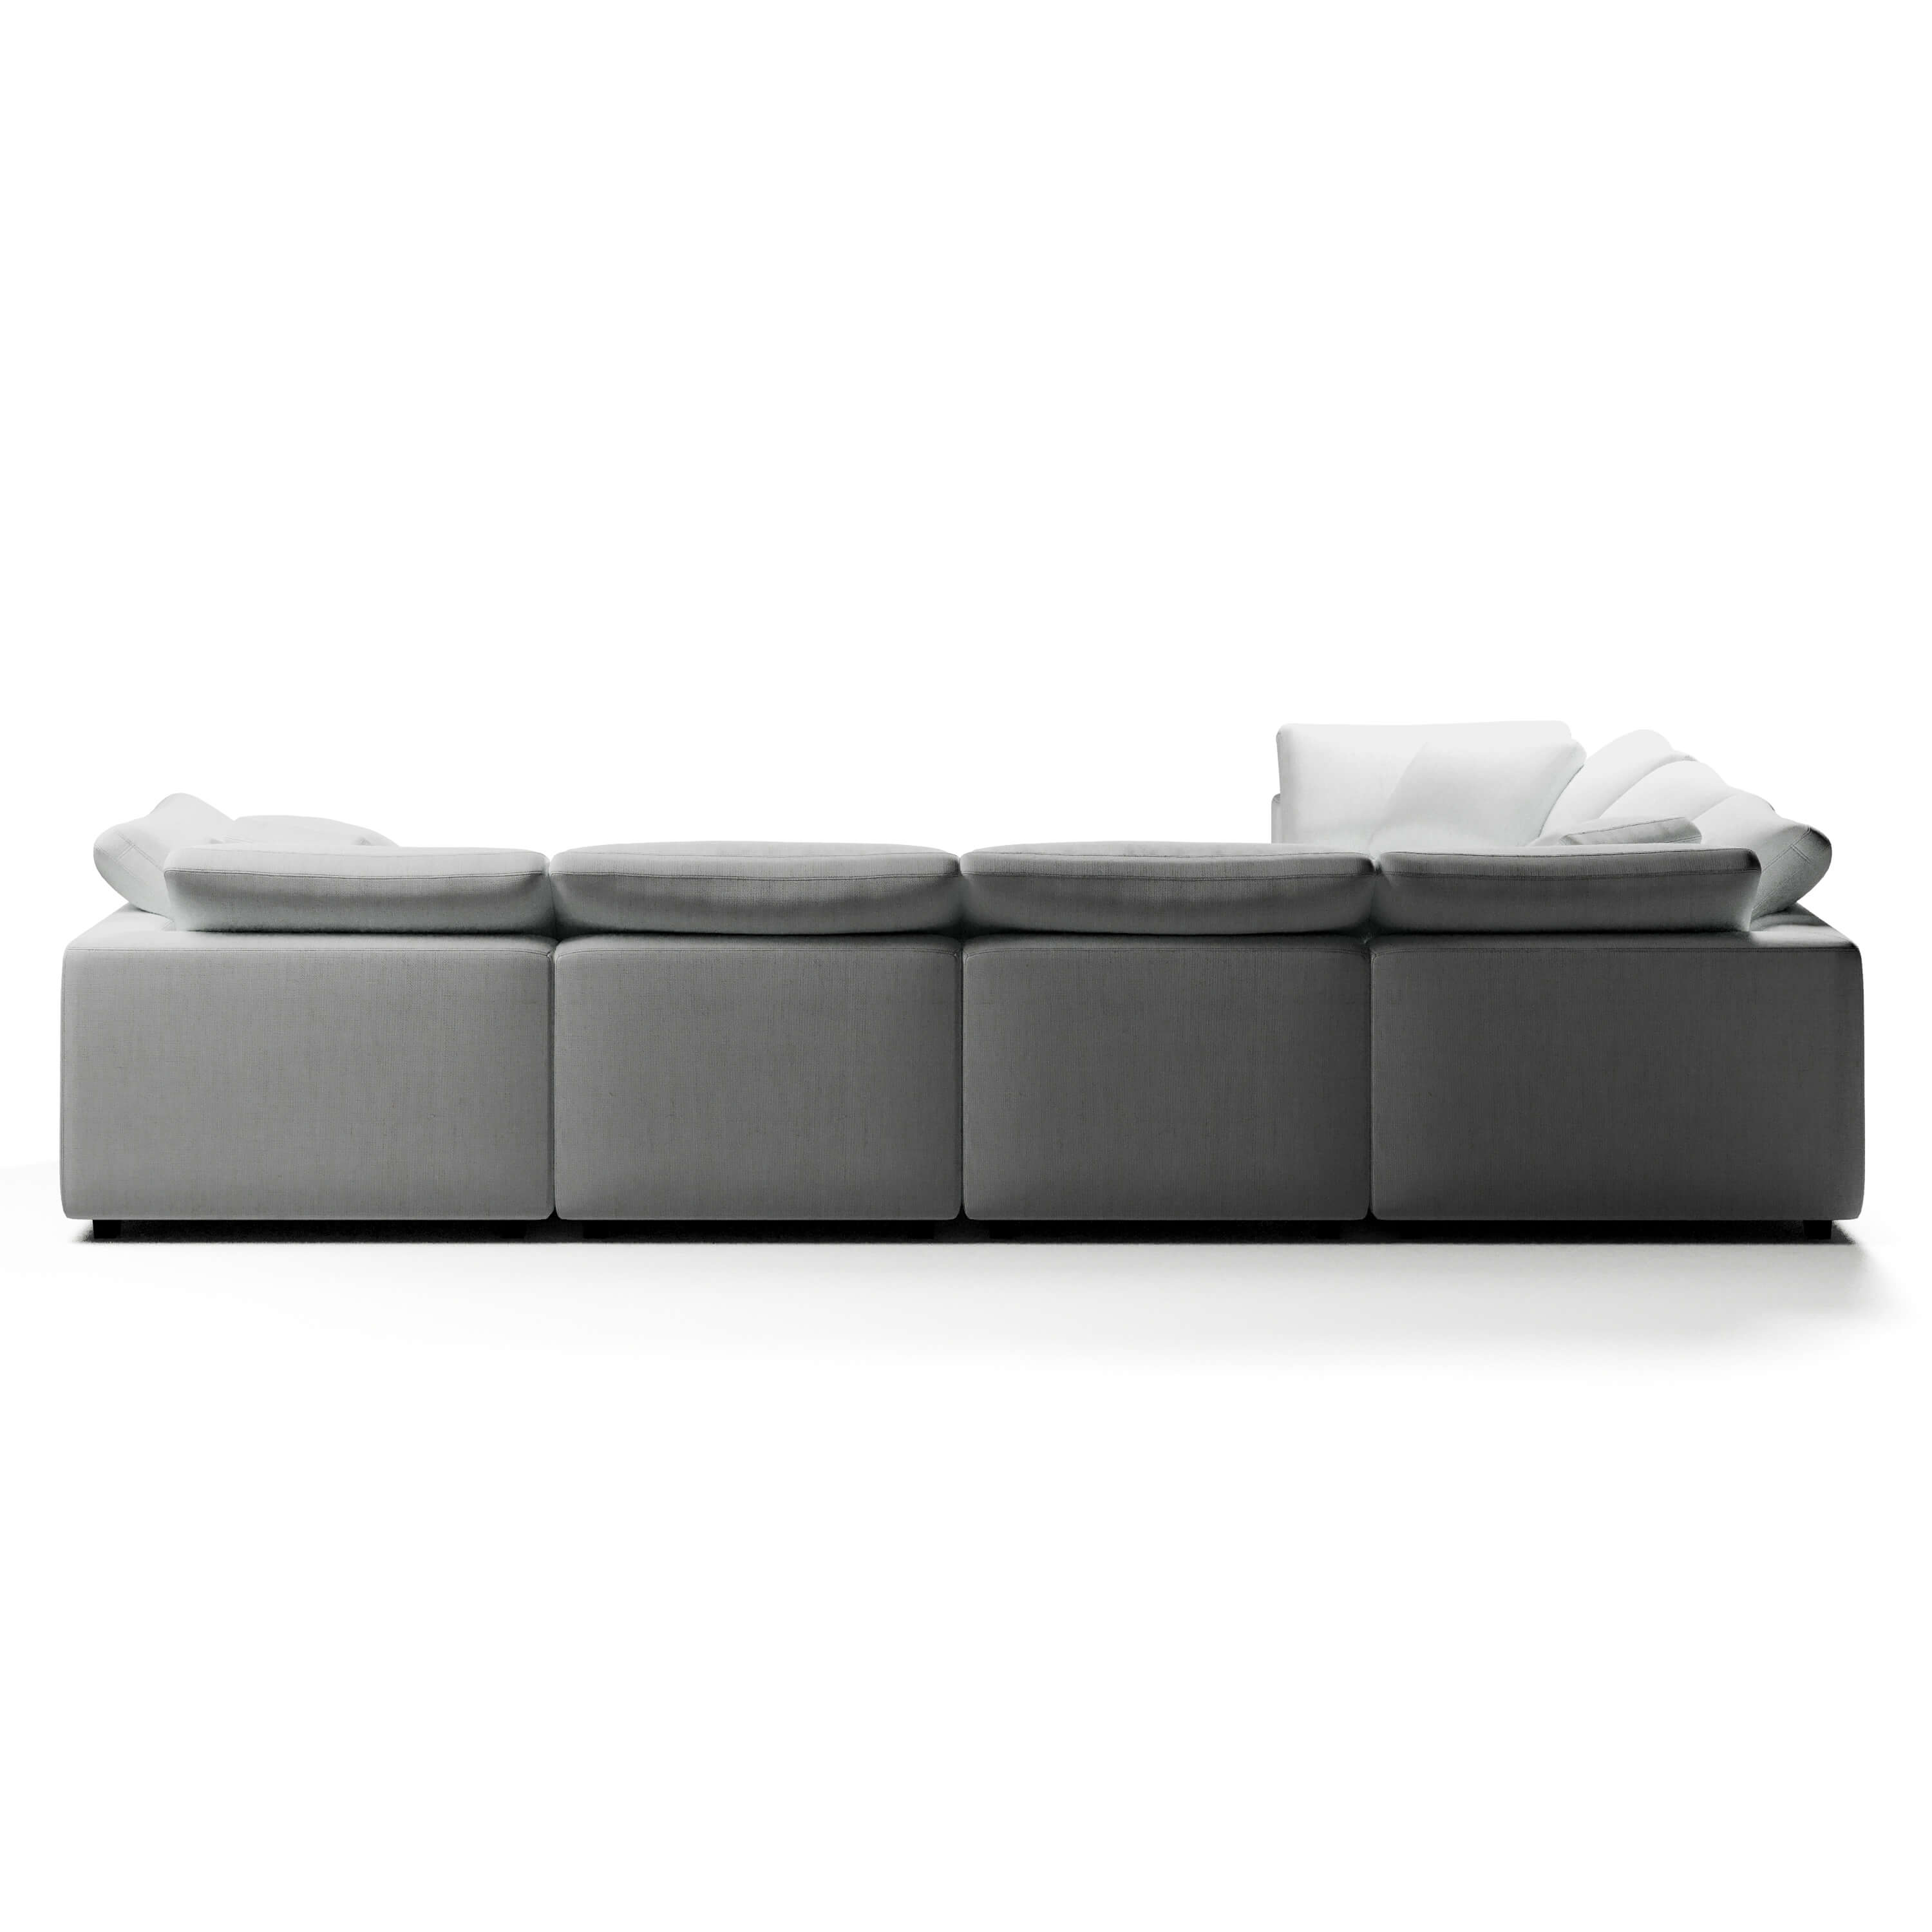 L-Sectional Modular Sofa | L-Sectional Sofa | Couch Haus